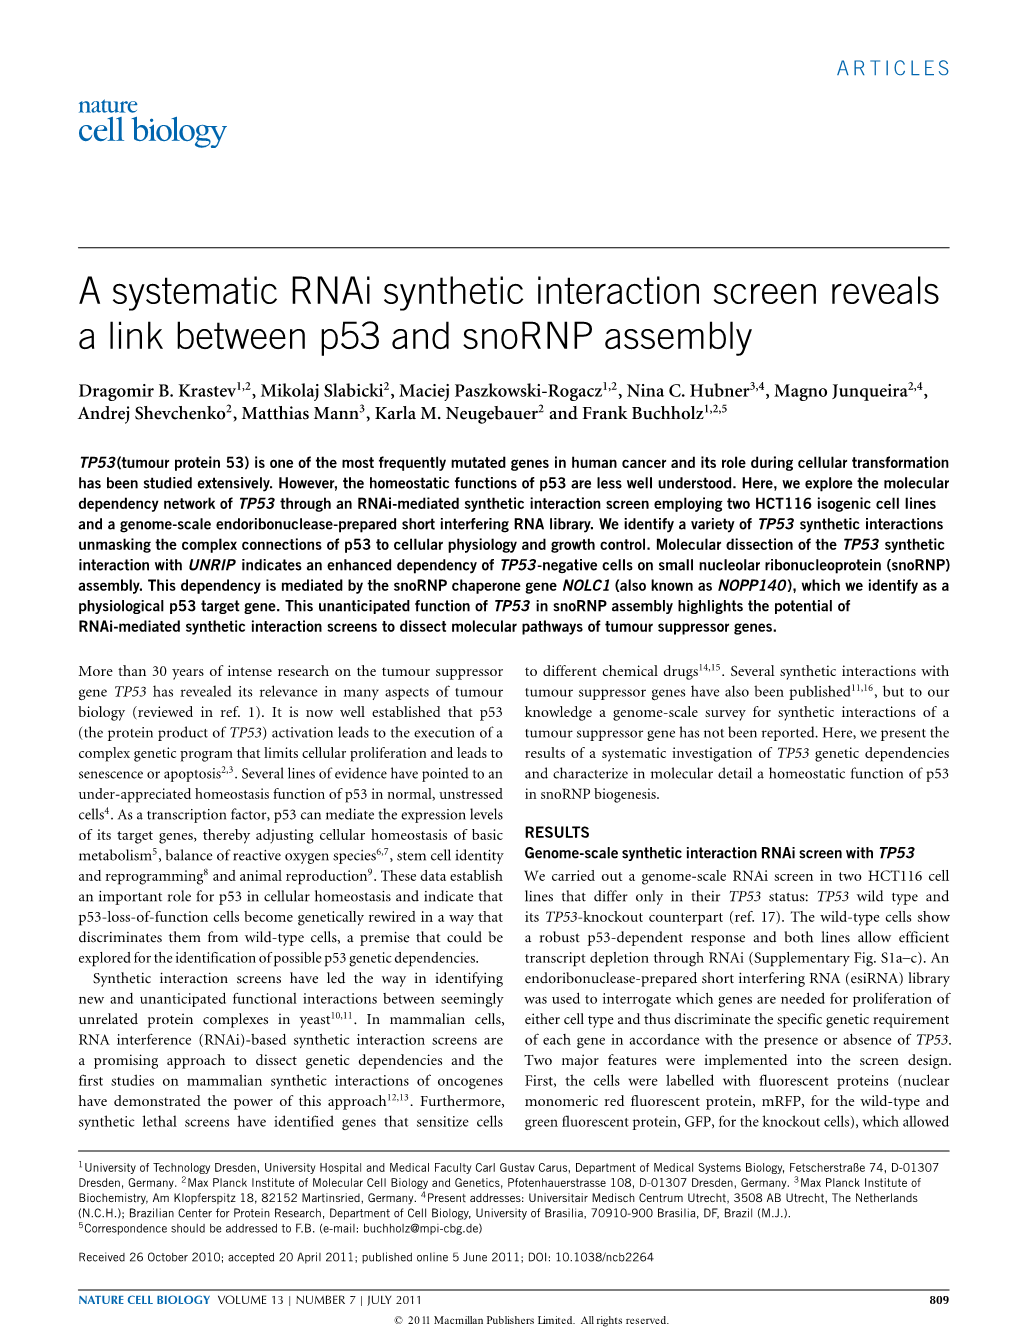 A Systematic Rnai Synthetic Interaction Screen Reveals a Link Between P53 and Snornp Assembly